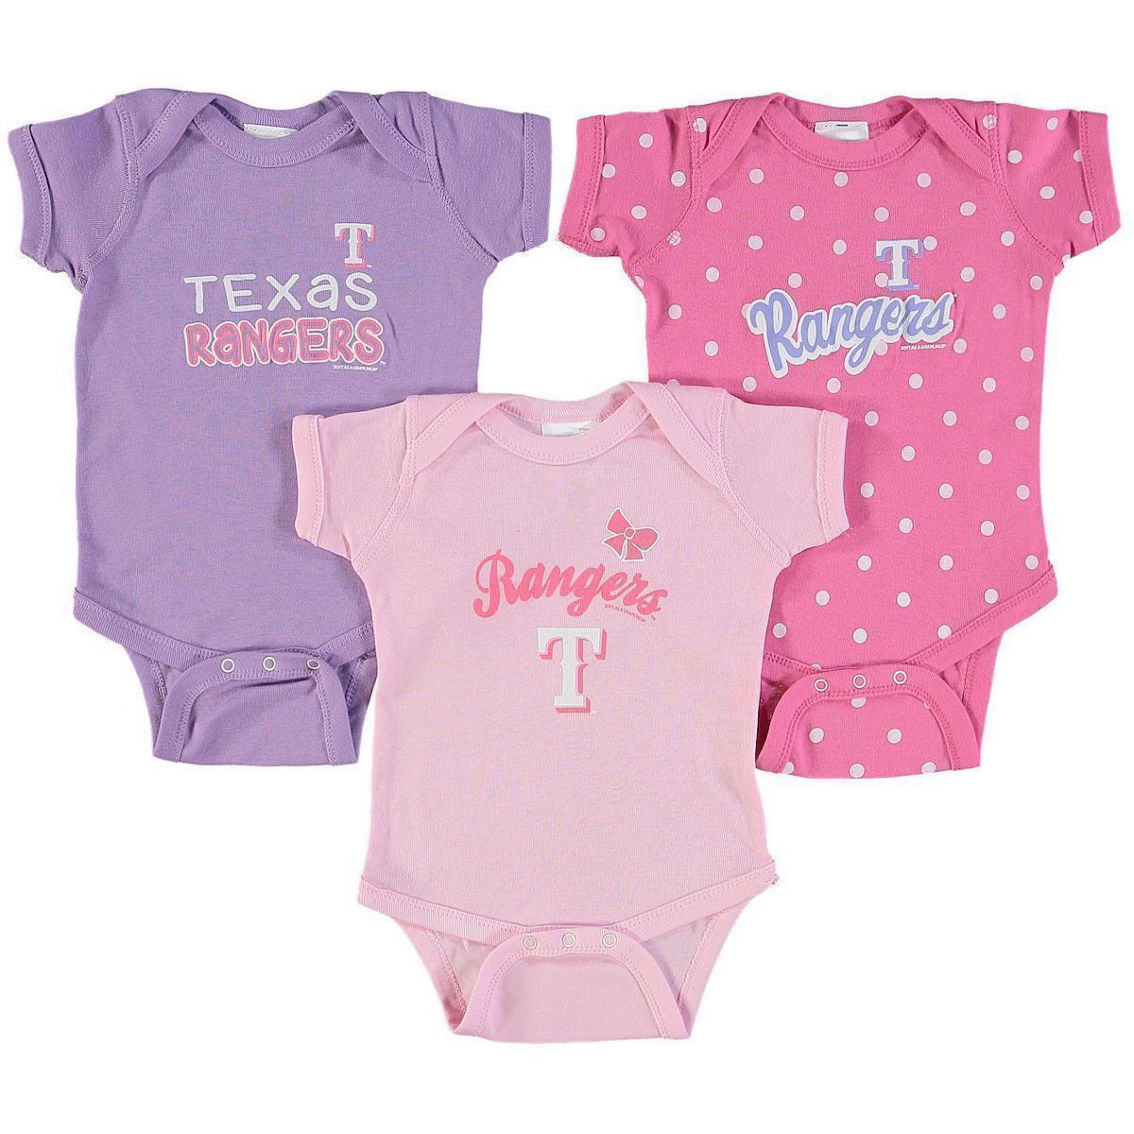 Soft as a Grape Girls Infant Pink/Purple Texas Rangers 3-Pack Rookie Bodysuit Set - Image 2 of 2